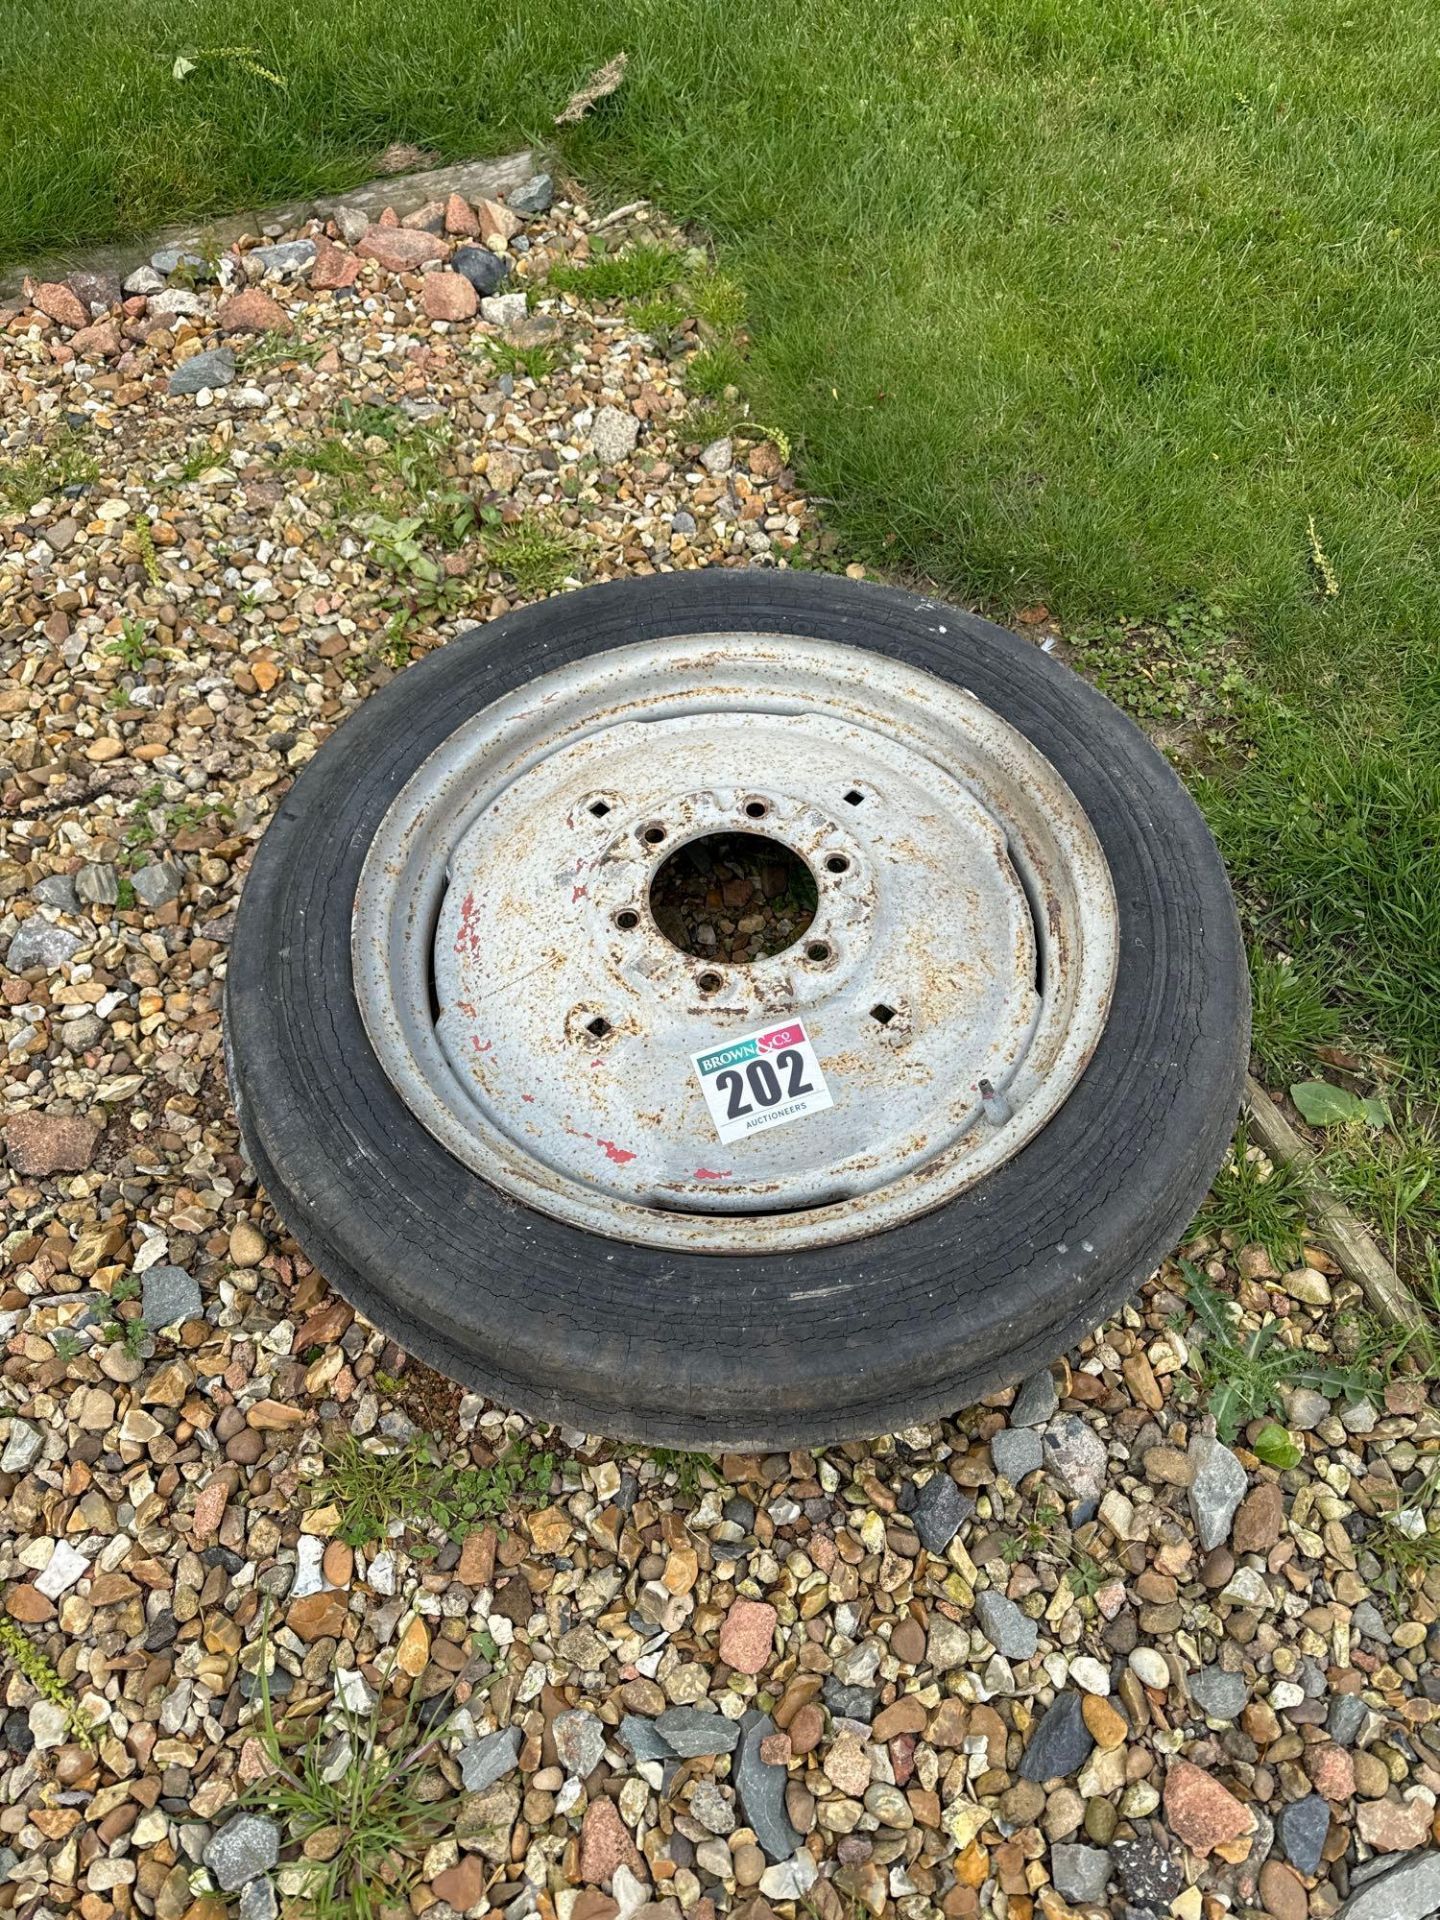 Single 4.00-19 wheel and tyre